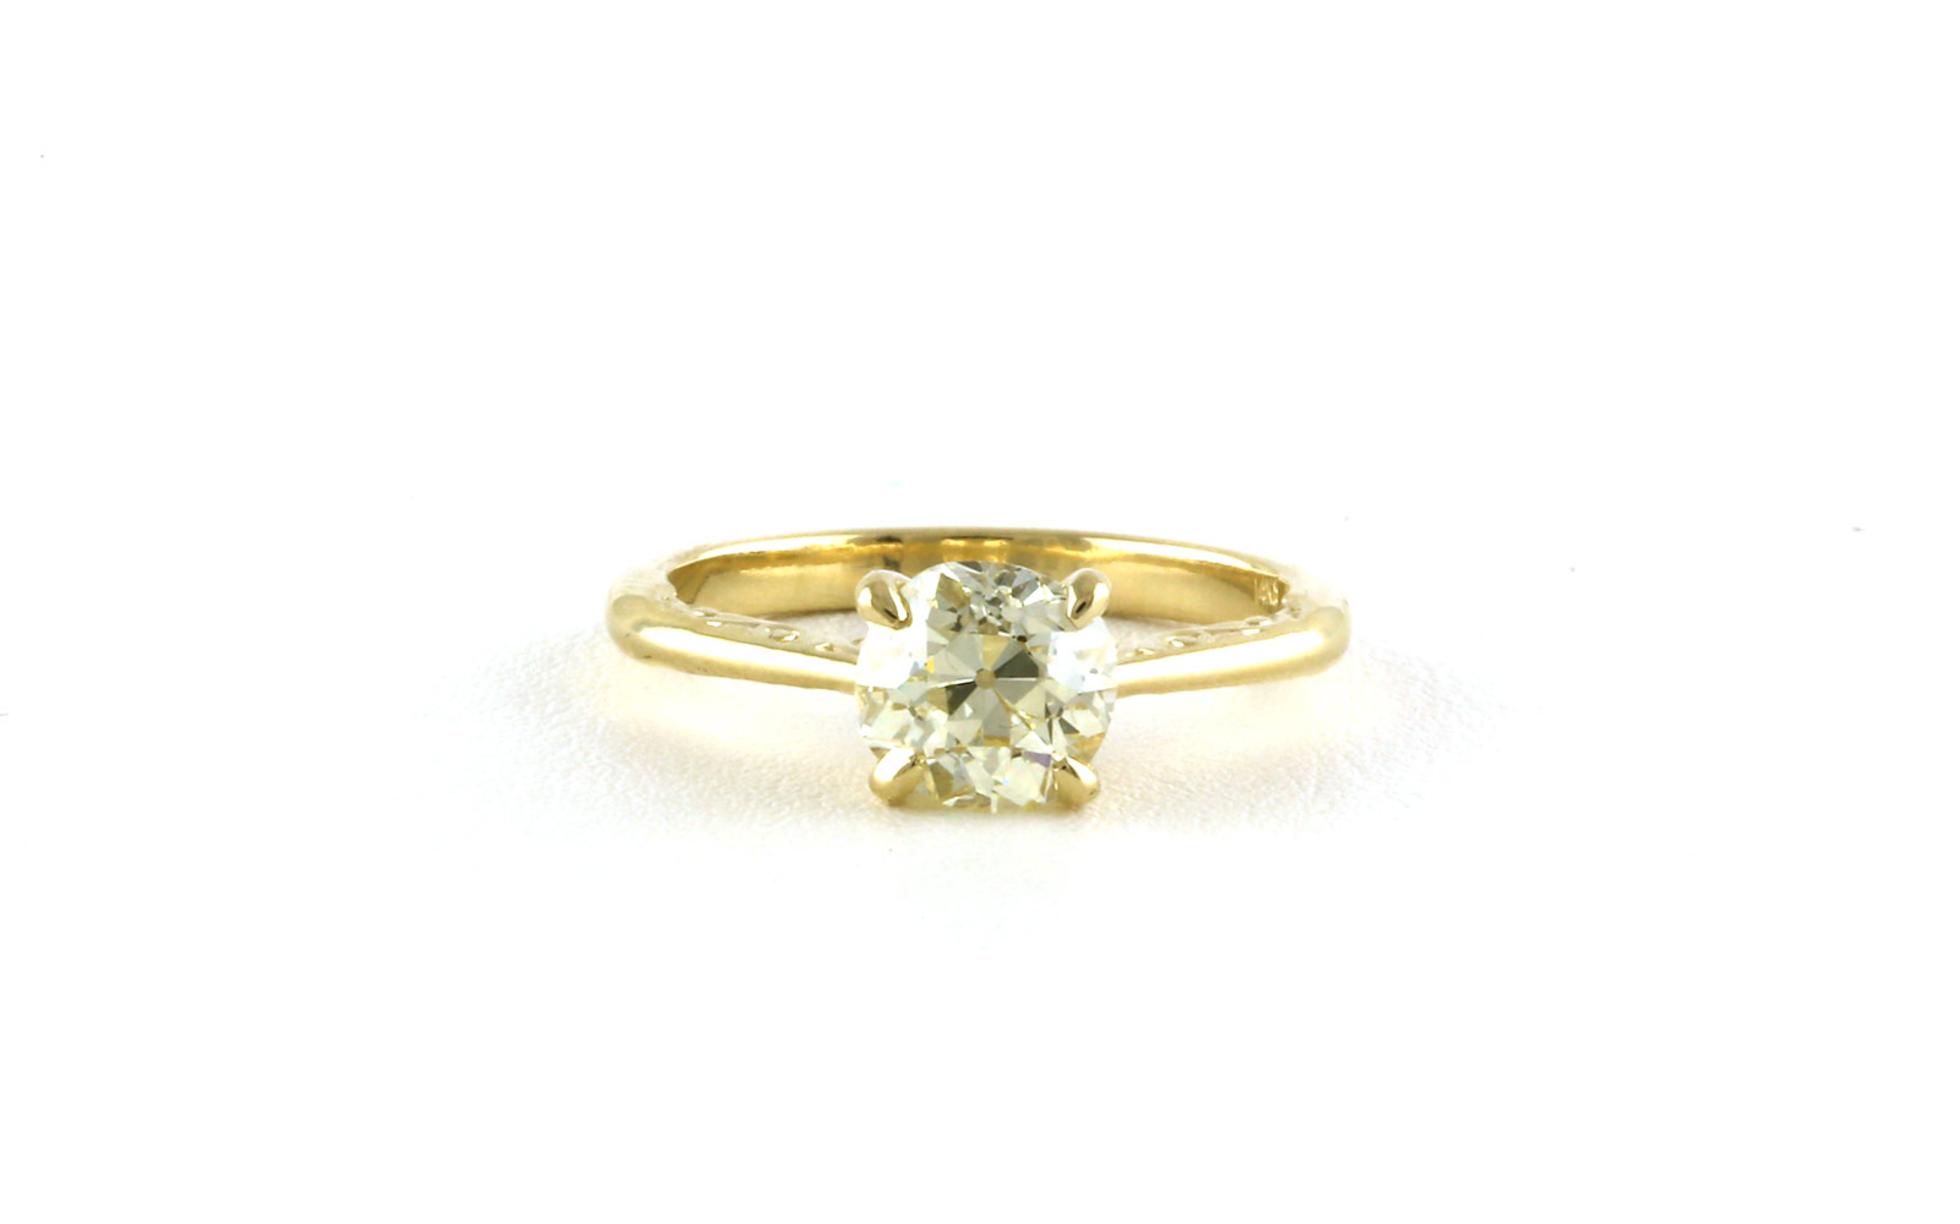 Diamond Engagement Ring with Peek-a-Boo Diamonds and Engraved Details in Yellow Gold (1.50cts)